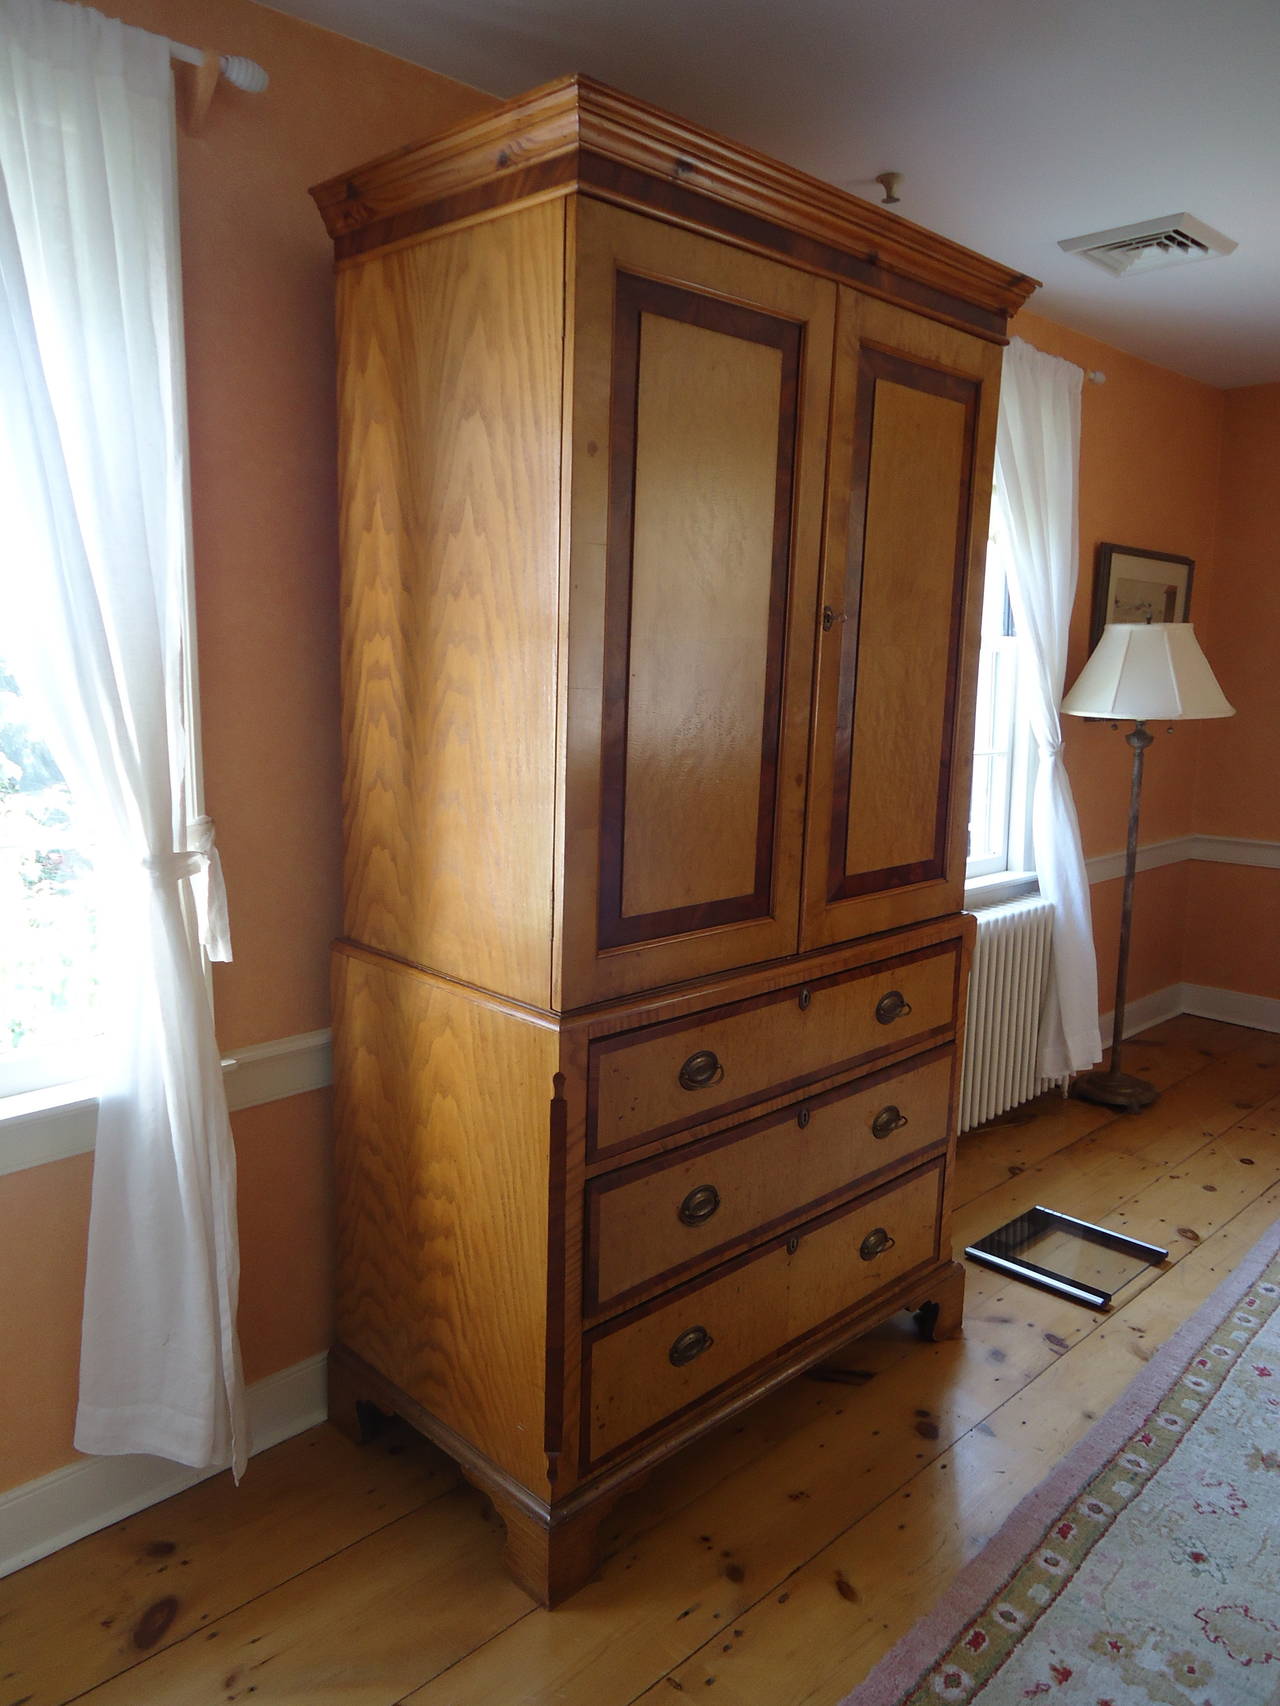 Large armoire in dark and light wood with original hardware having a top section which opens by a key to three large shelves within, 20.5 D x 38.5 W.
Bottom is a commode with three roomy drawers that all work smoothly.